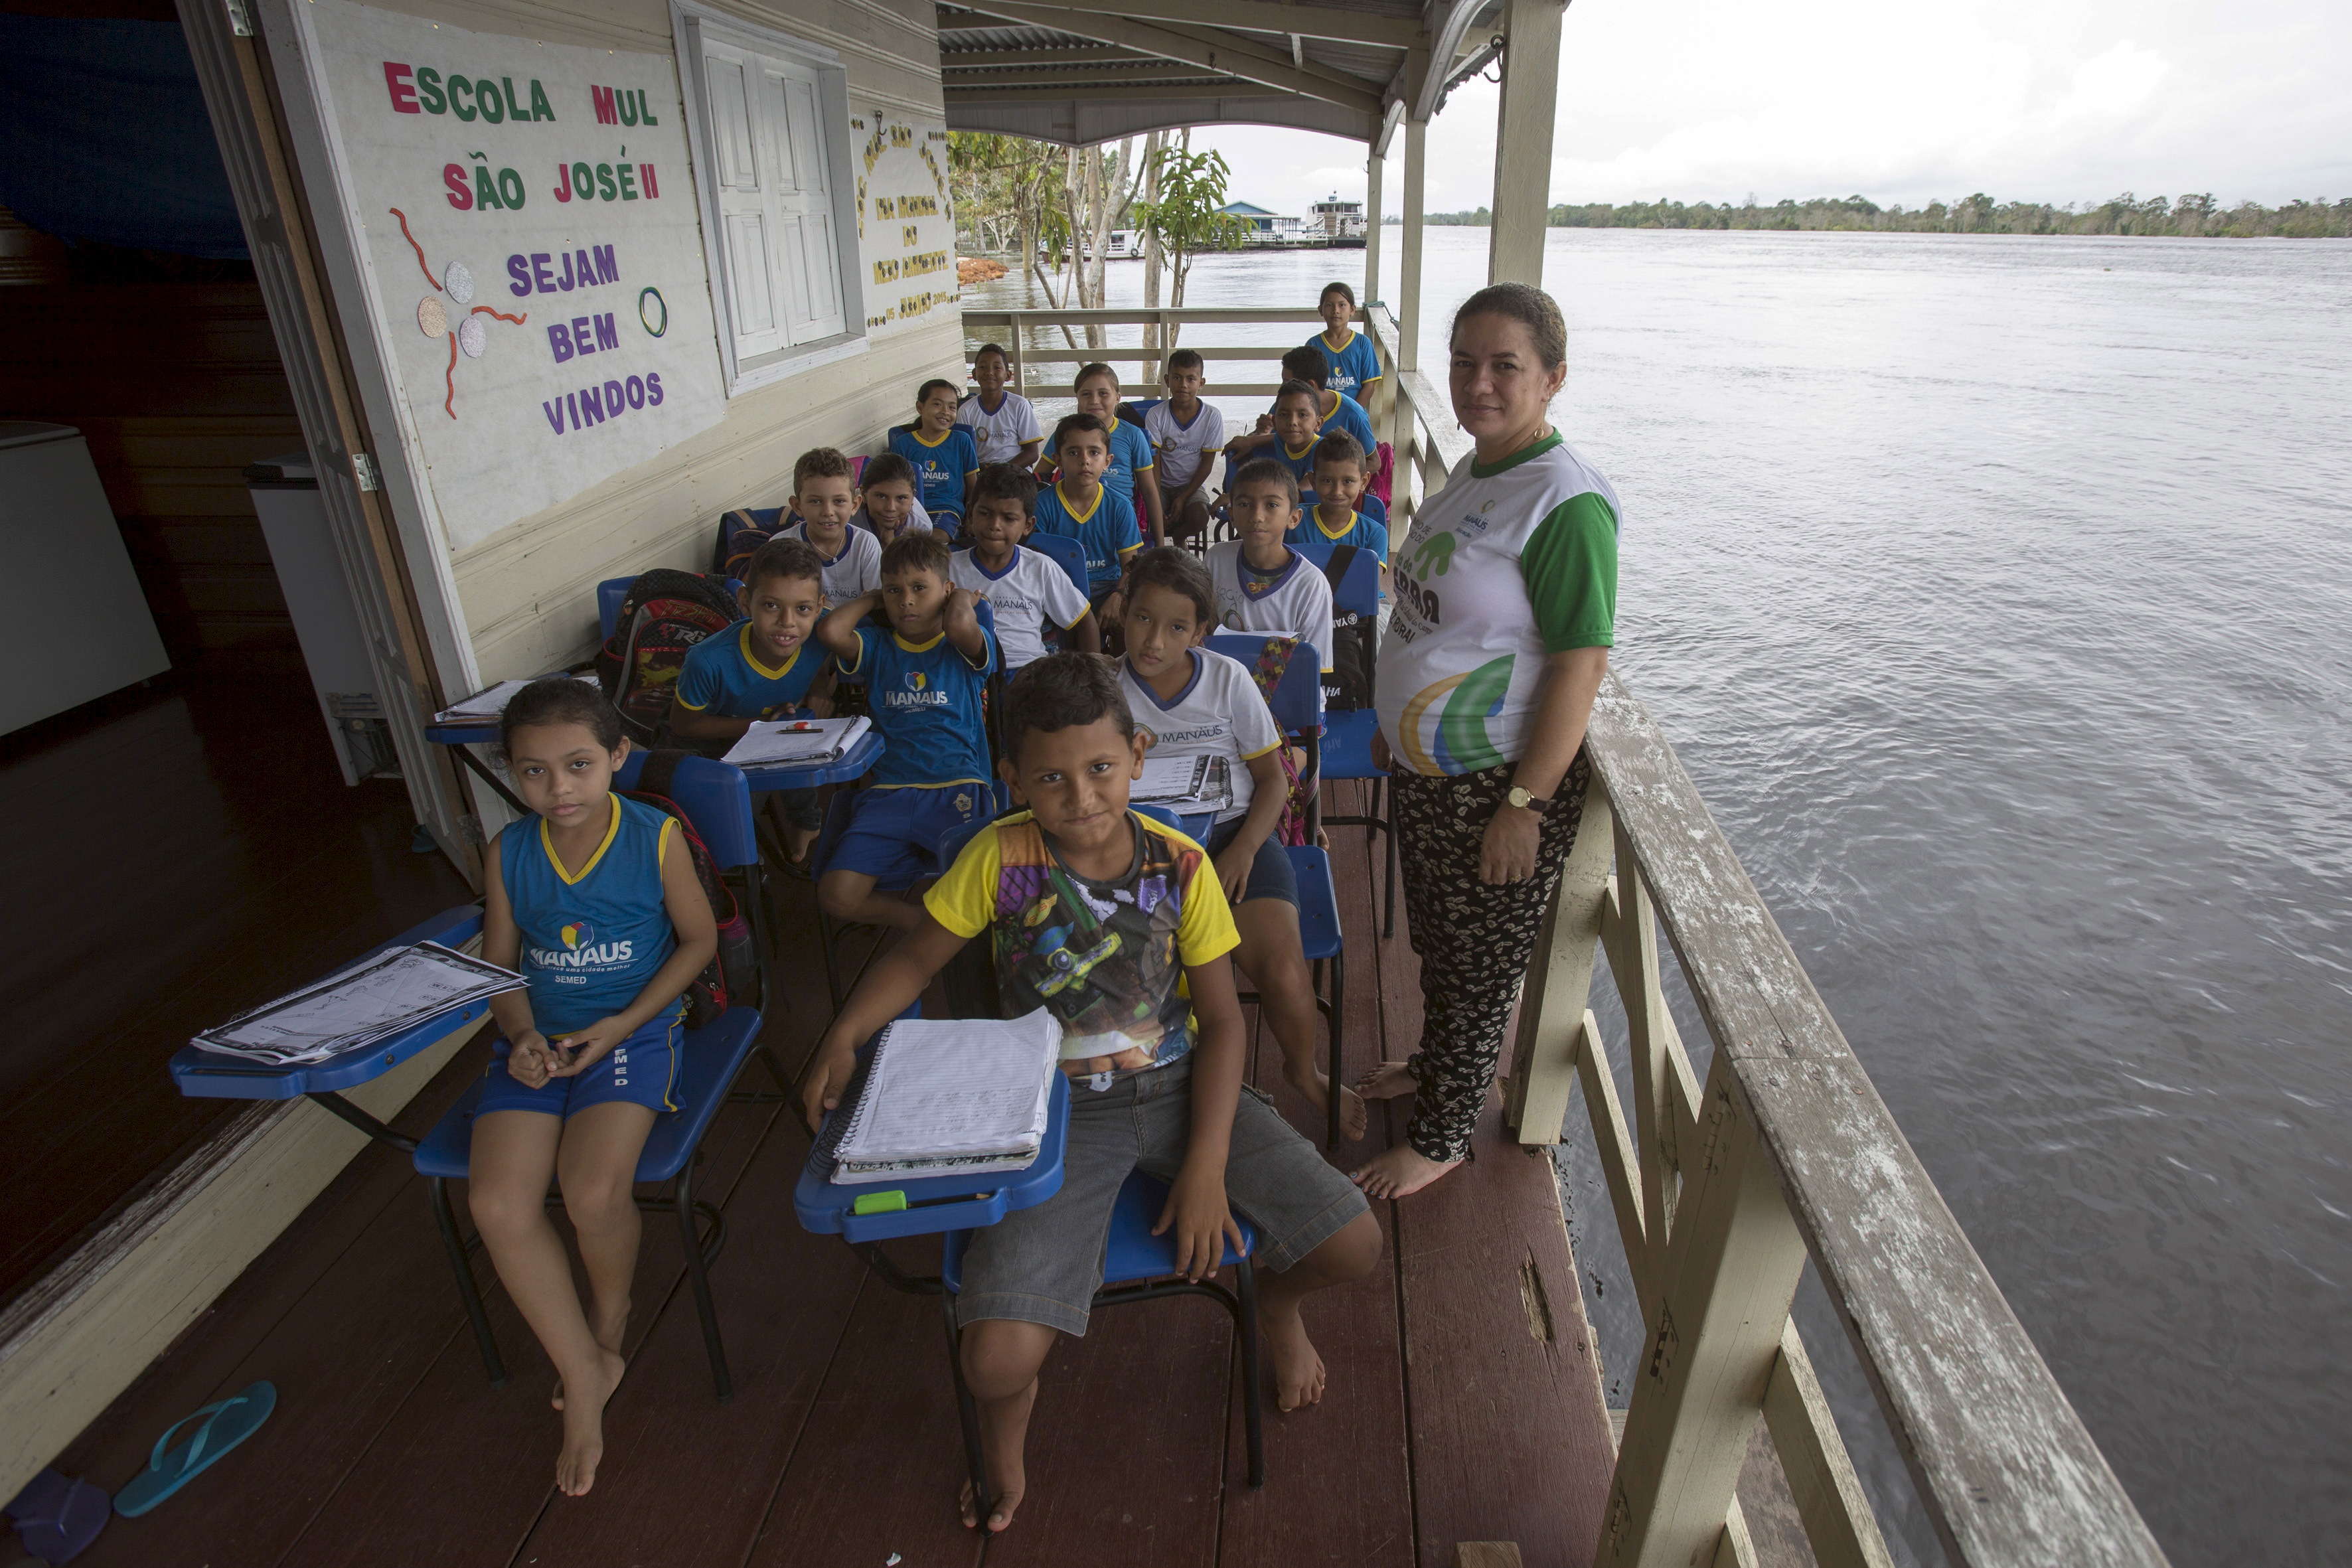 These kids have class on a floating school boat called Municipal School